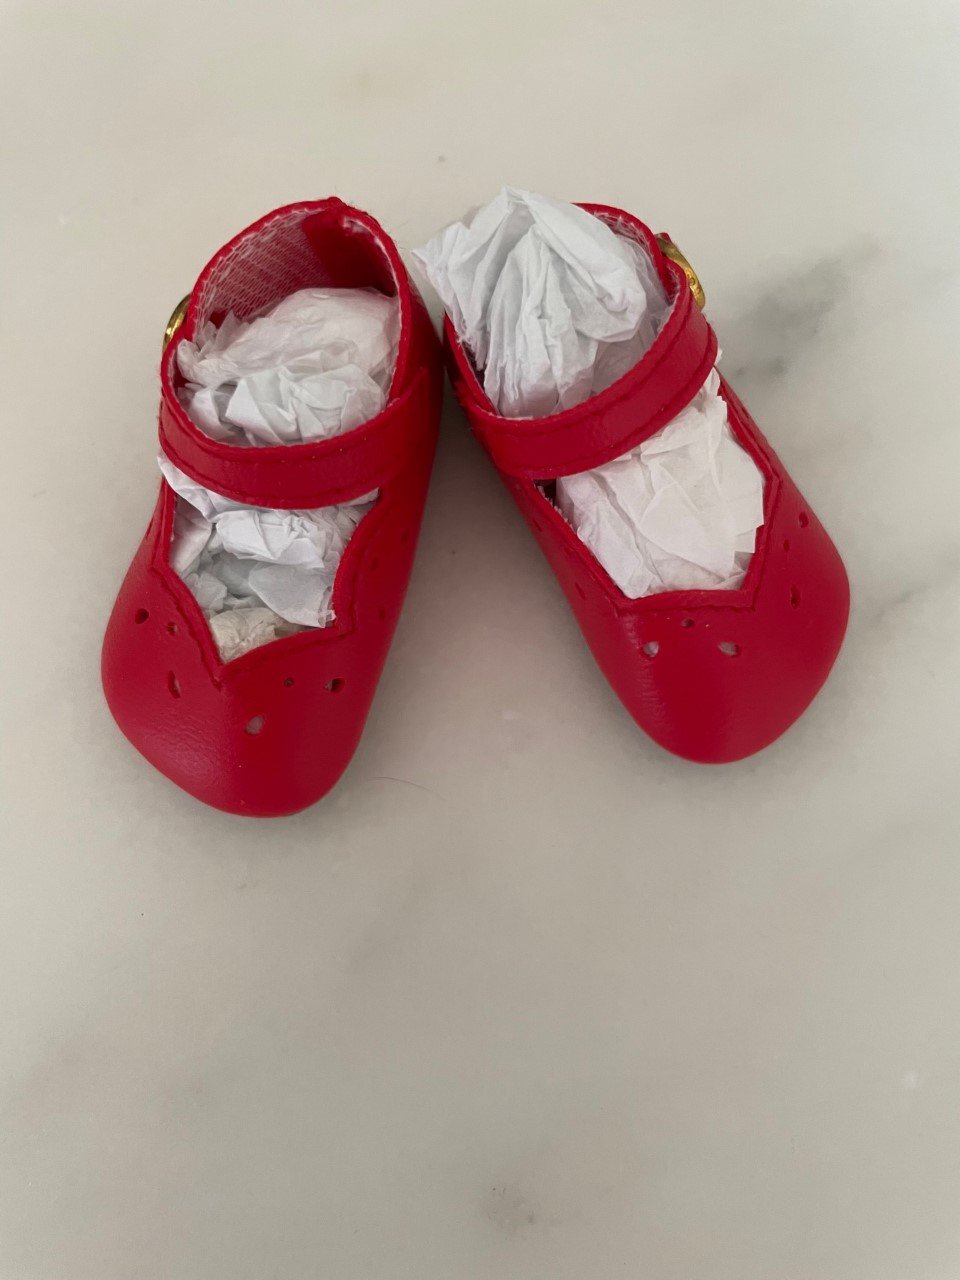 Teddy/Doll Shoes for FLOPSY ONLY